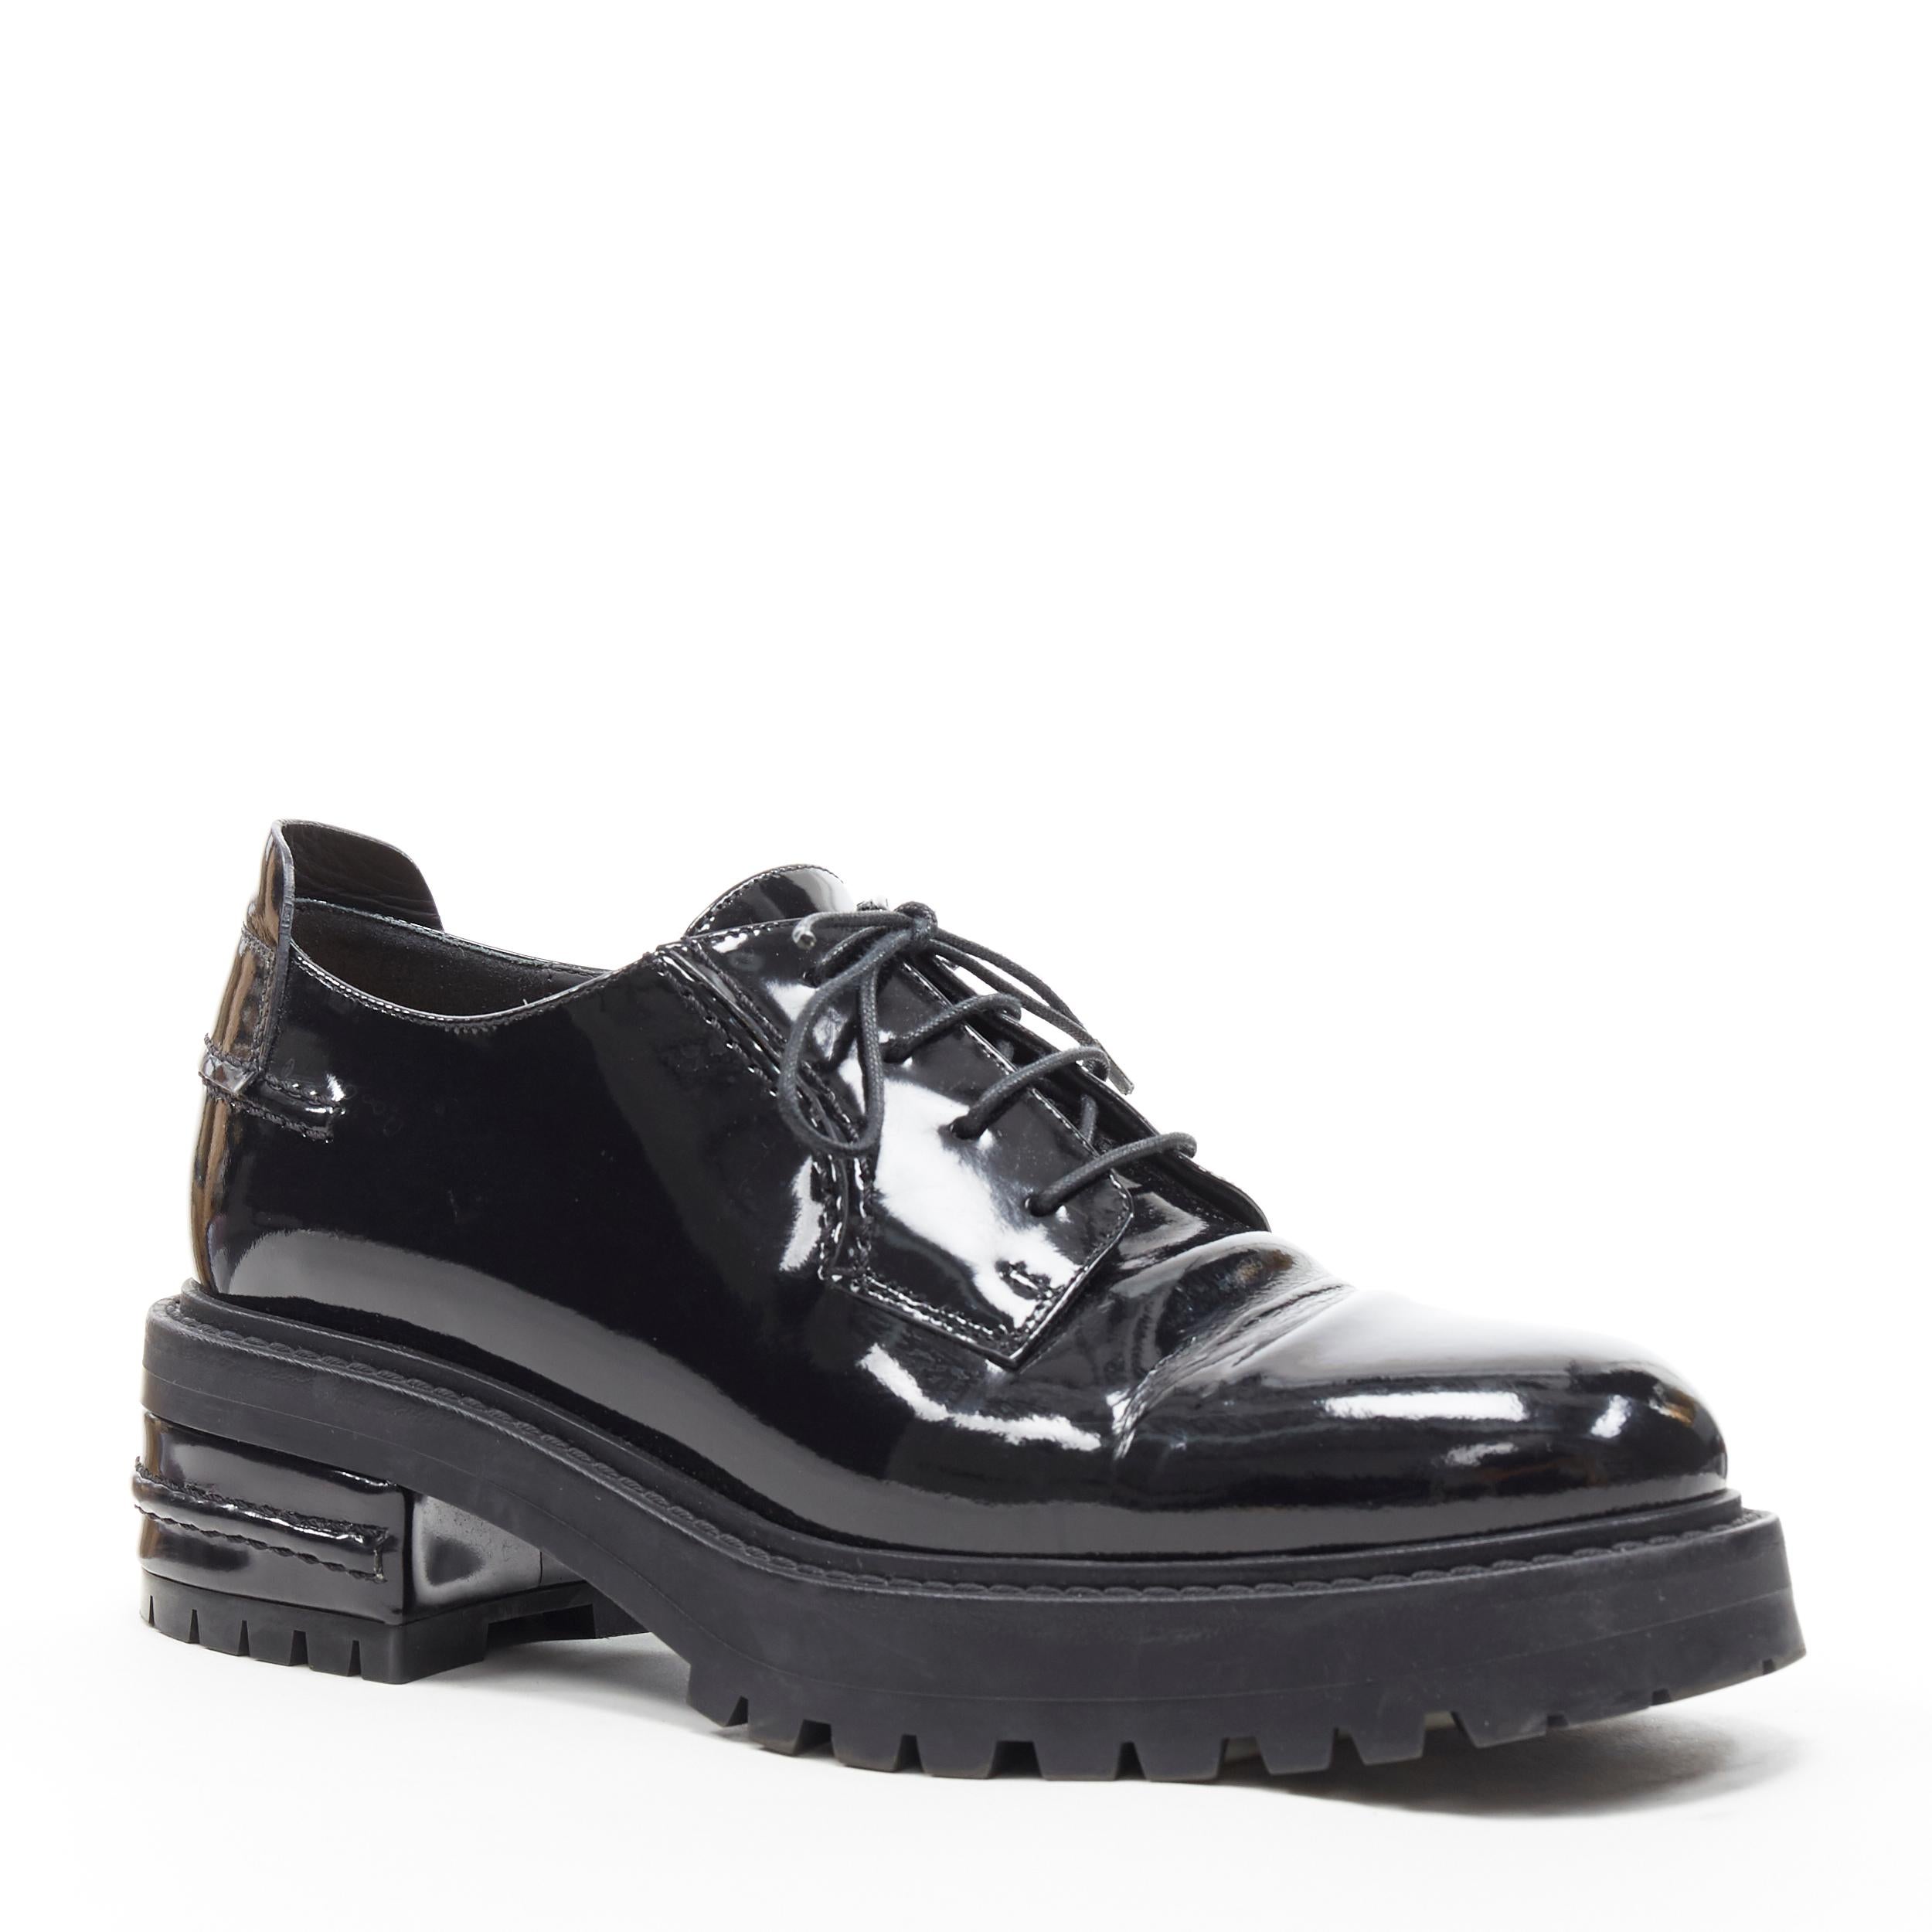 CHRISTIAN DIOR black patent stacked trucker platform sole lace up brogue EU38
Brand: Christian Dior
Designer: Christian Dior
Model Name / Style: Patent brogue
Material: Patent leather
Color: Black
Pattern: Solid
Closure: Lace up
Extra Detail: